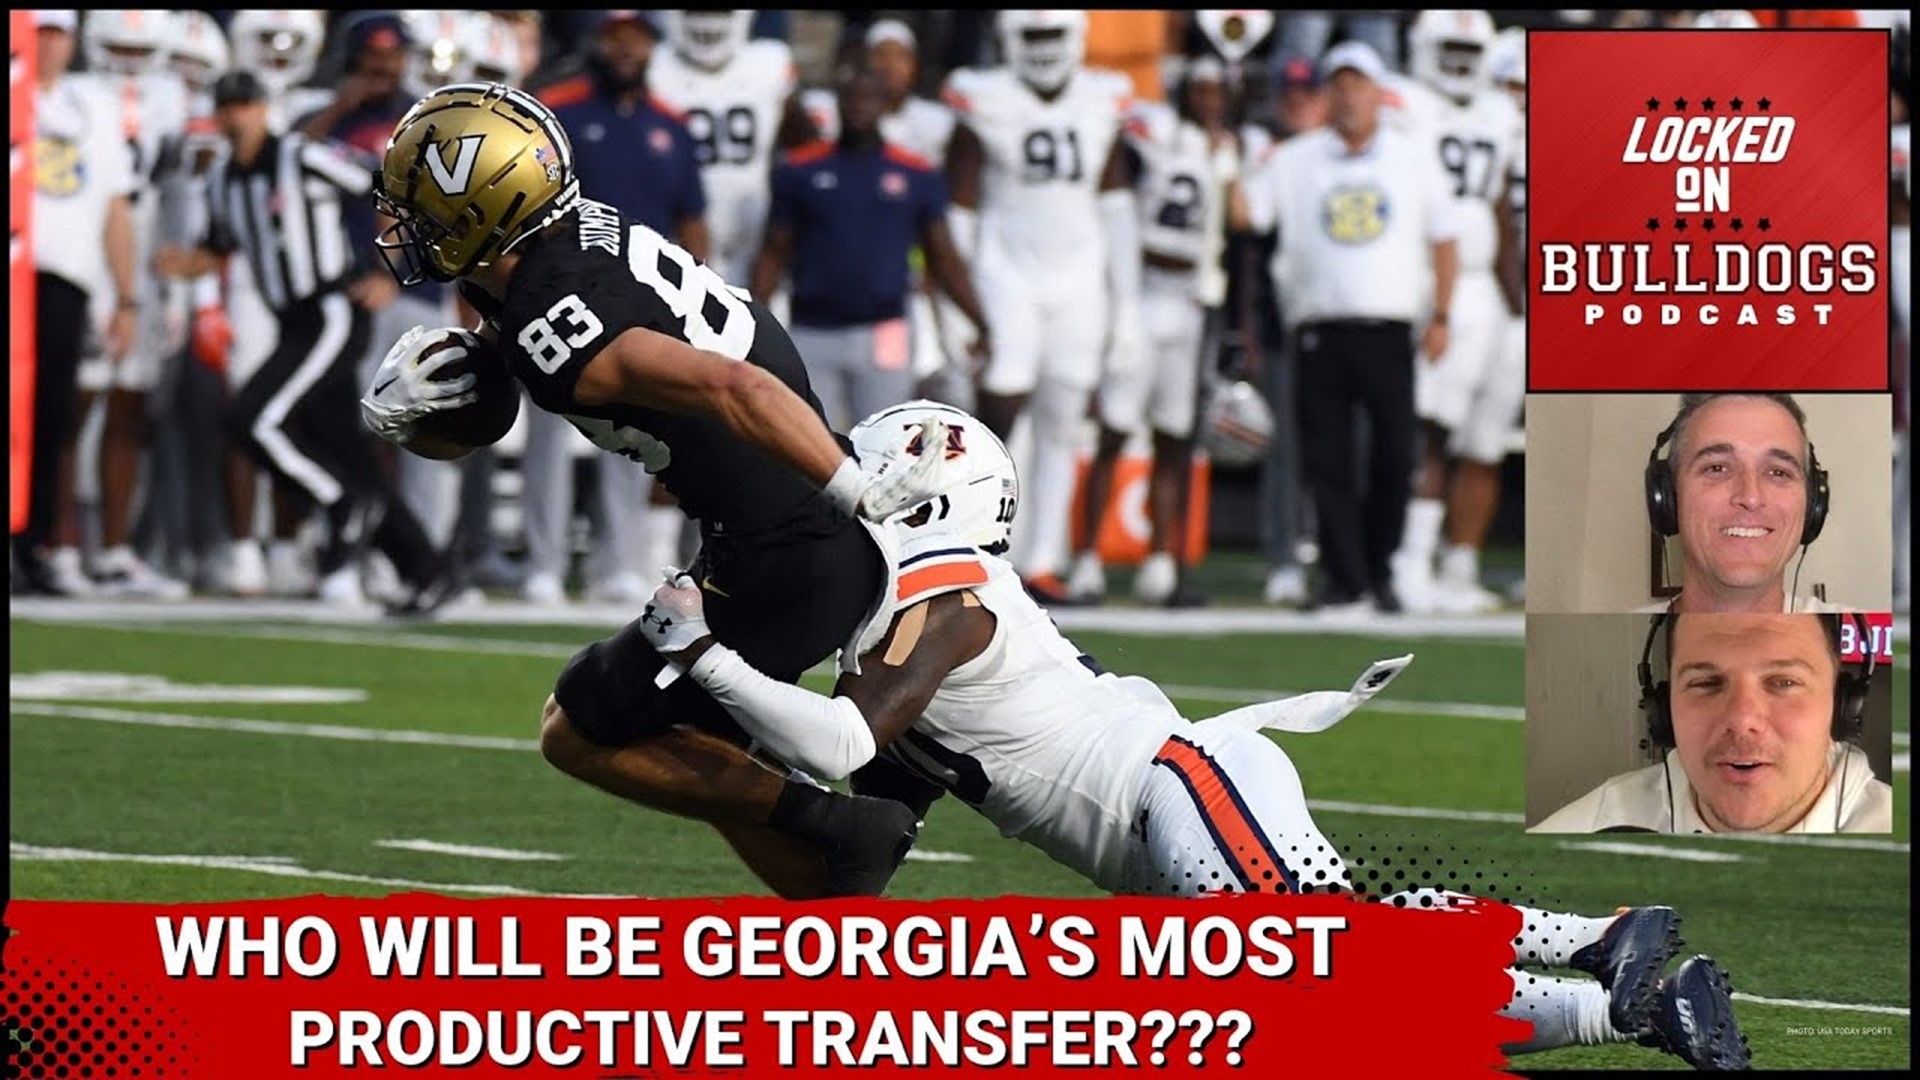 Georgia Football signed some VERY productive transfers this offseason. Who will be MOST impactful?